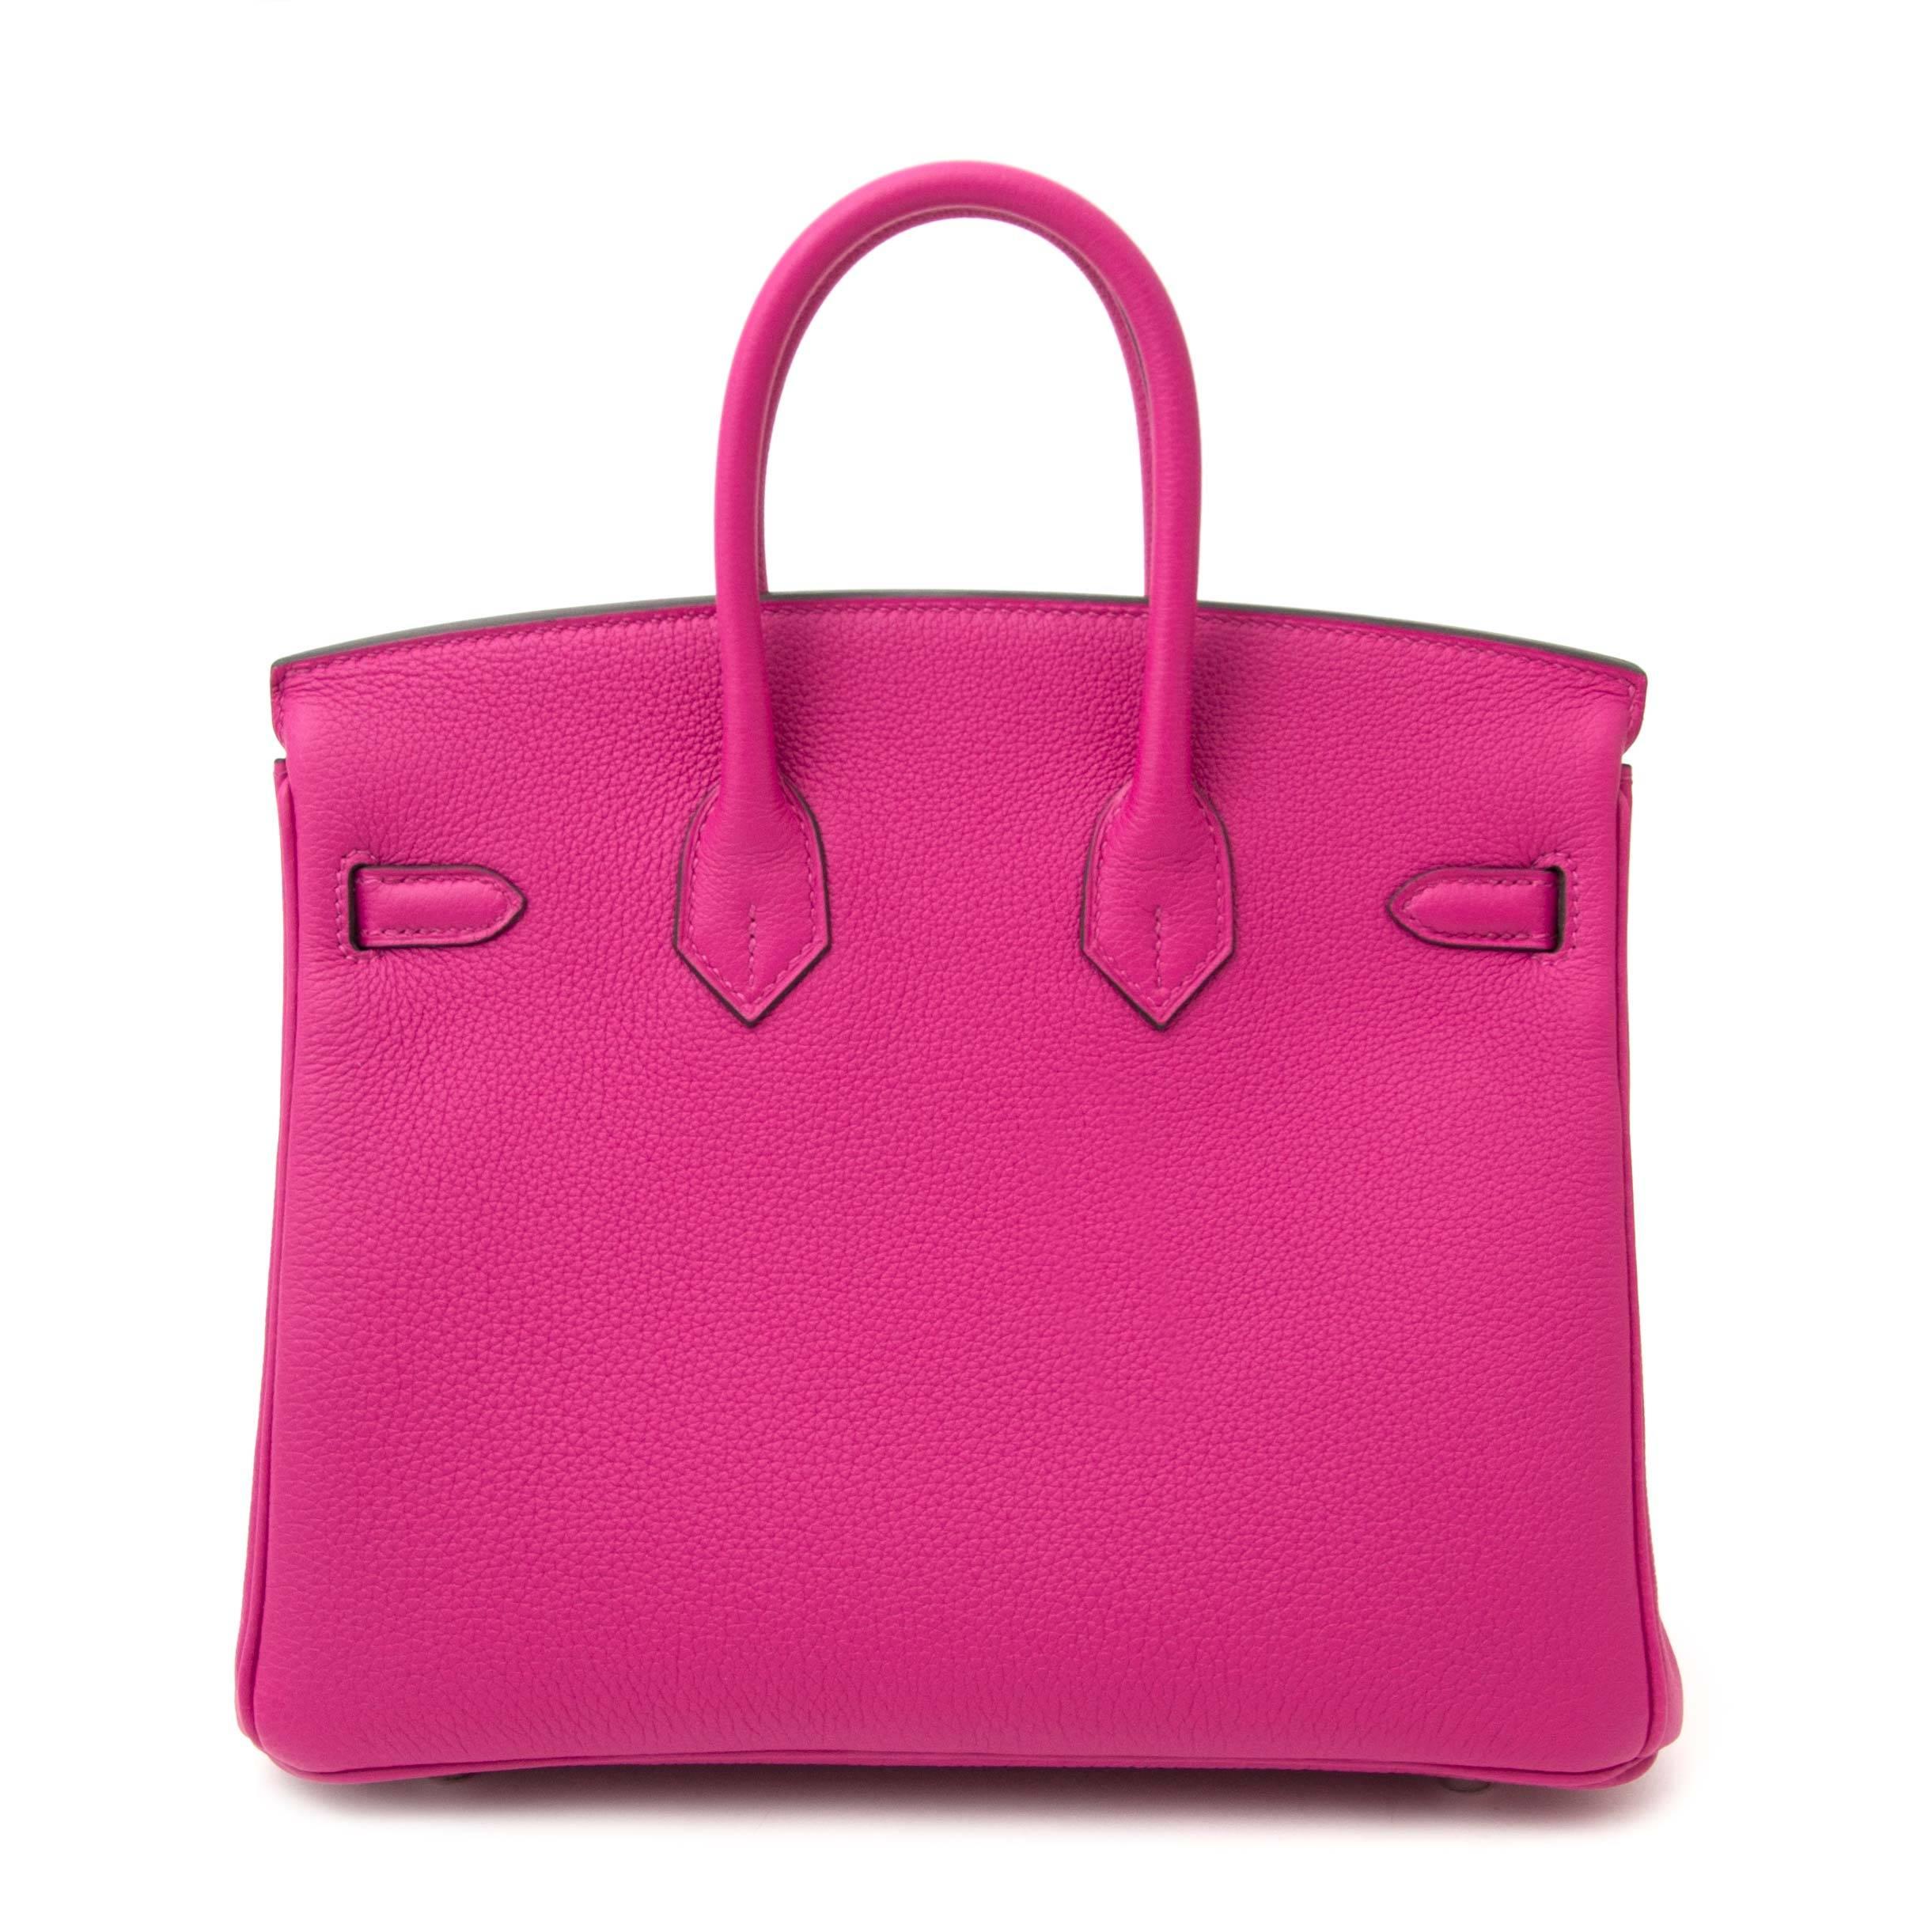 Never used

Birkin 25 Pourpre Togo PHW

Never used Hermès Birkin bag in soft and smooth Togo leather. The exquisite new Pourpre color and palladium hardware make each other pop!
(new color from 2017 collection). The size and special pink and purple